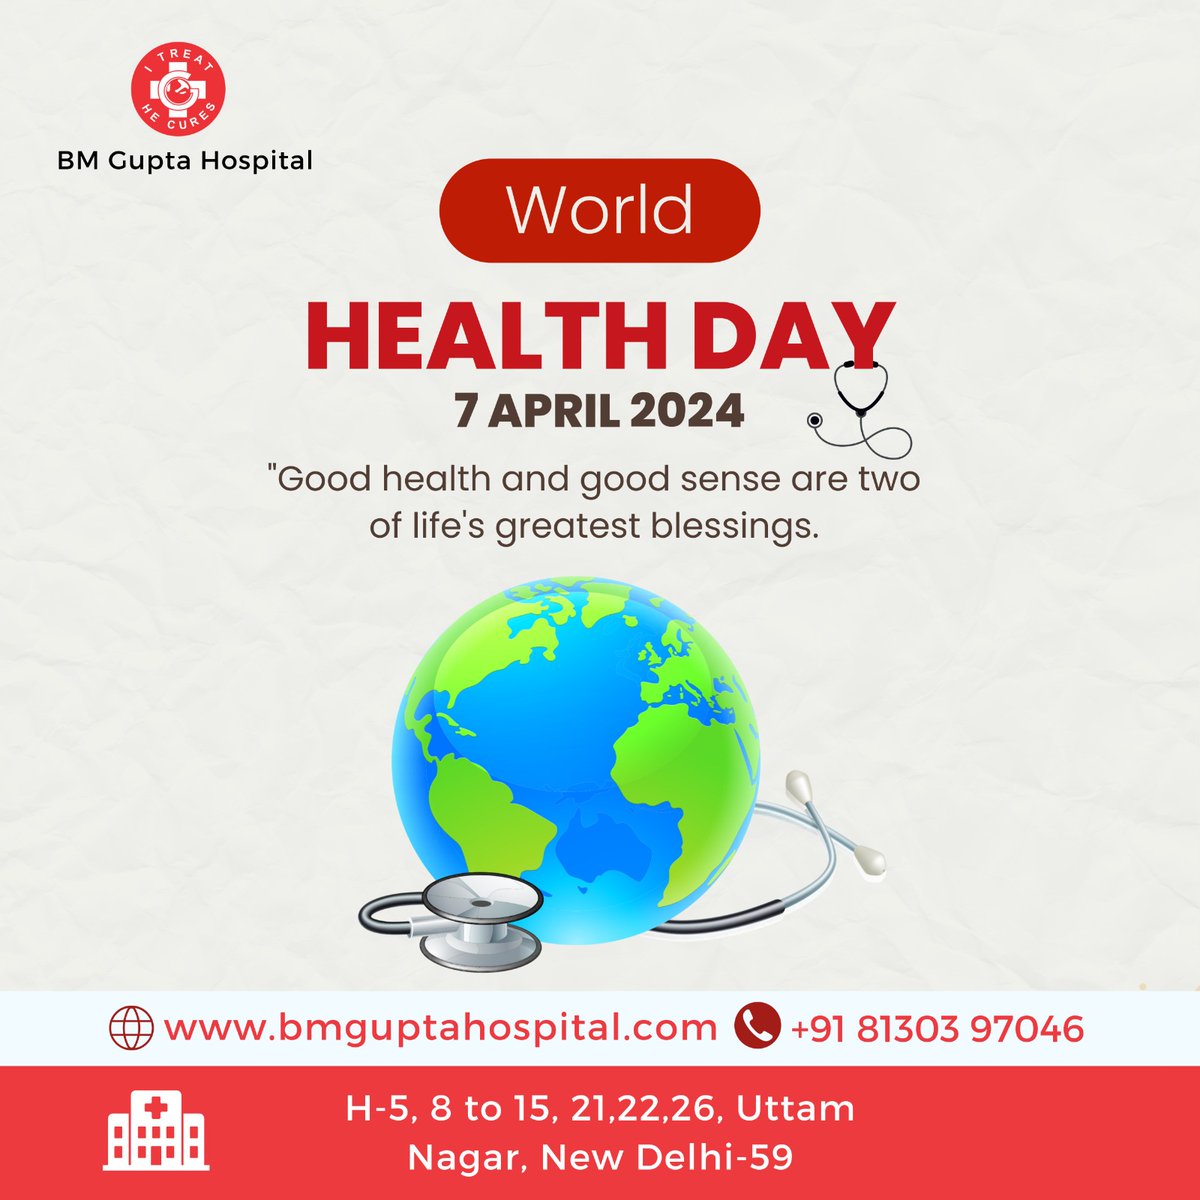 World Health Day 'Preventive care is key to maintaining good health. This World Health Day, make sure to schedule regular check-ups and screenings with your healthcare provider.' #WorldHealthDay #HealthForAll #HealthEquity #HealthcareForAll #HealthyLiving #PreventiveHealth